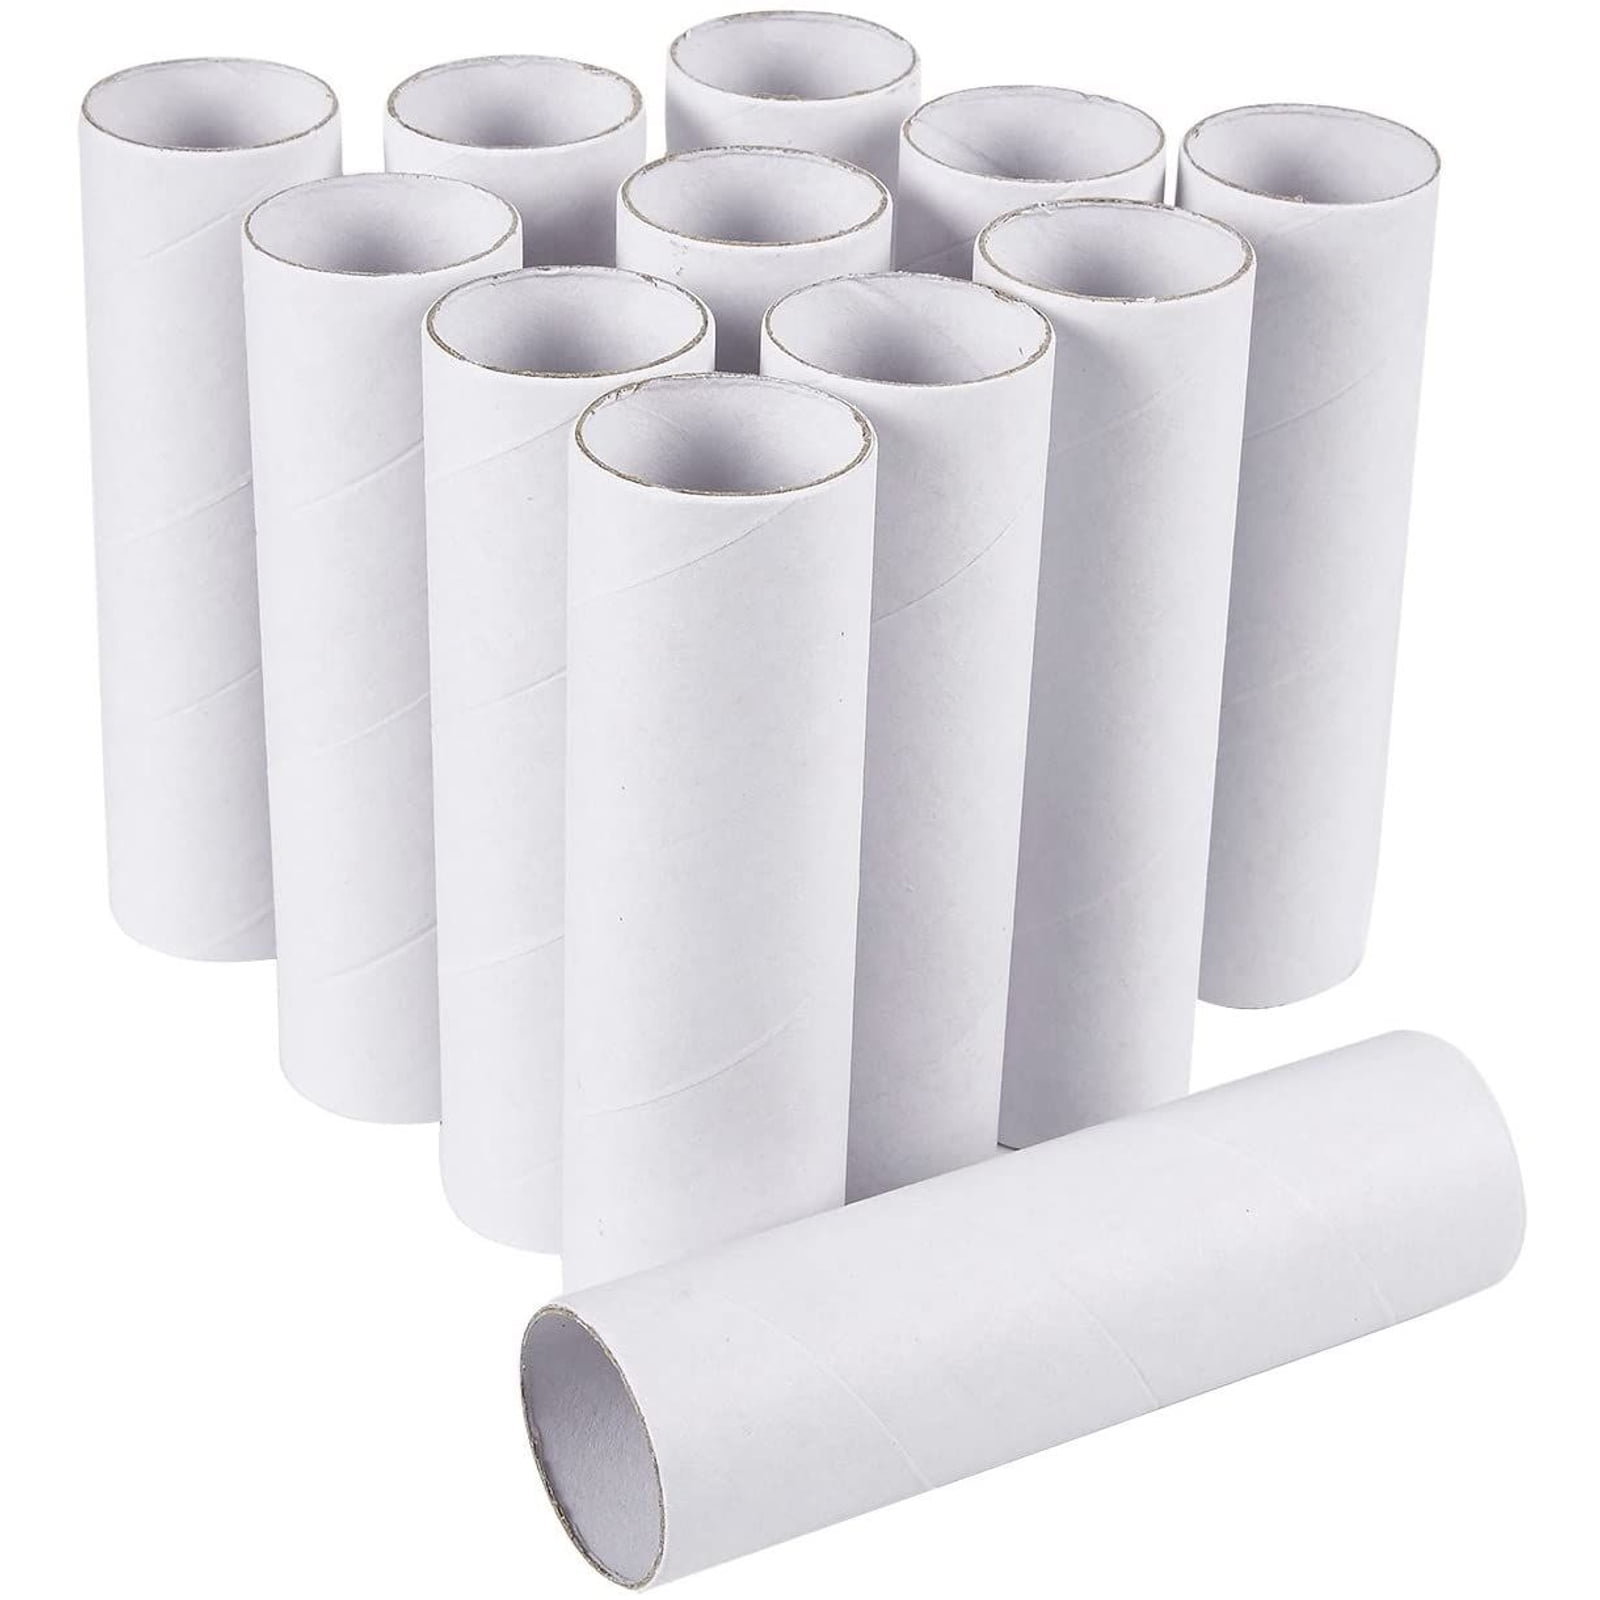 10 Heavy Duty Thick Cardboard Paper Art Tubes 4" 